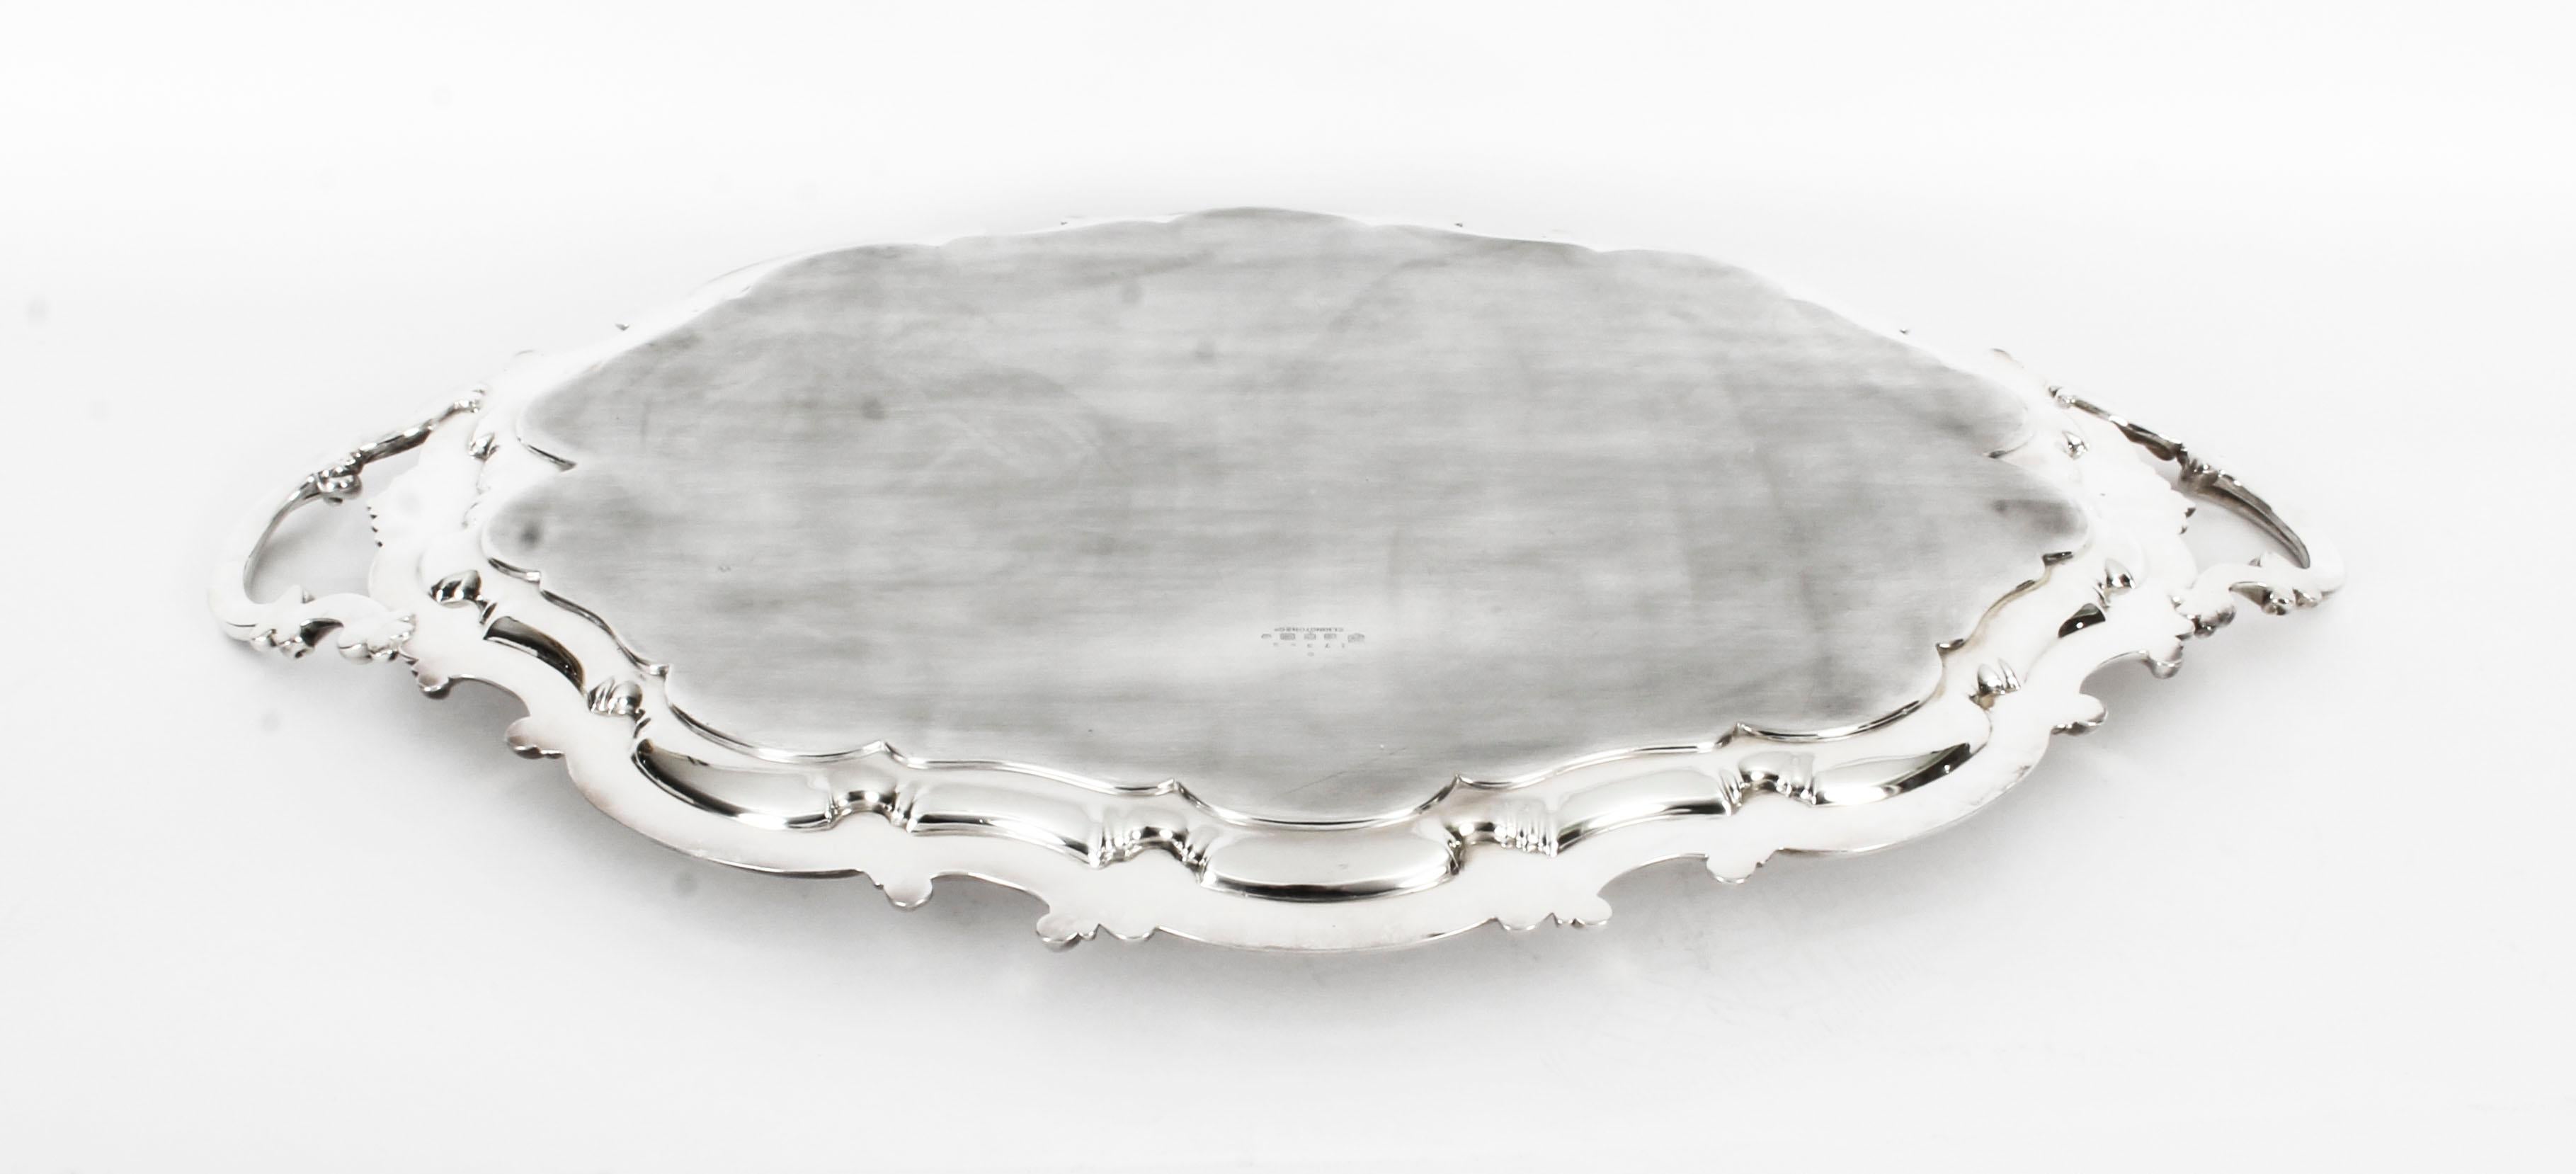 Antique Victorian Oval Silver Plated Tea Tray by Elkington, 19th Century 4